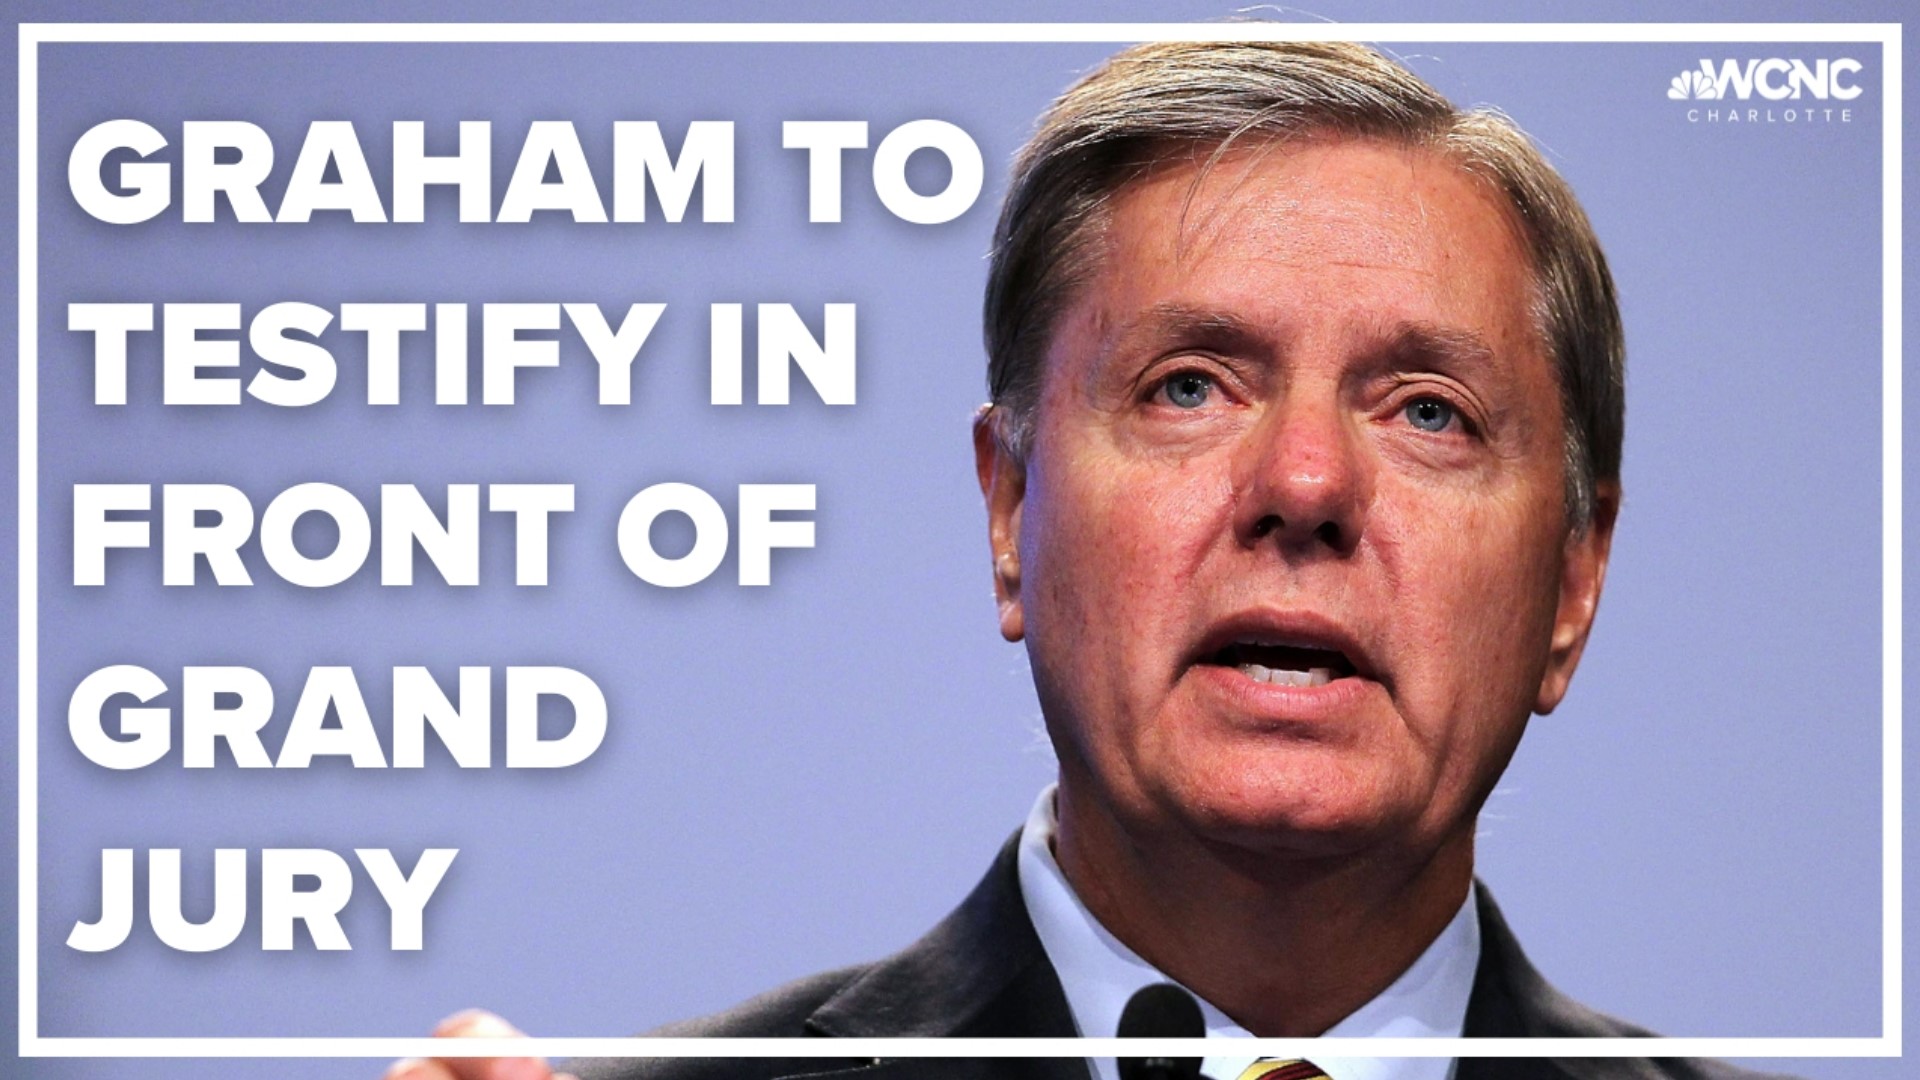 U.S. Sen. Lindsey Graham, of South Carolina, must testify in front of a special grand jury, a judge has ruled.